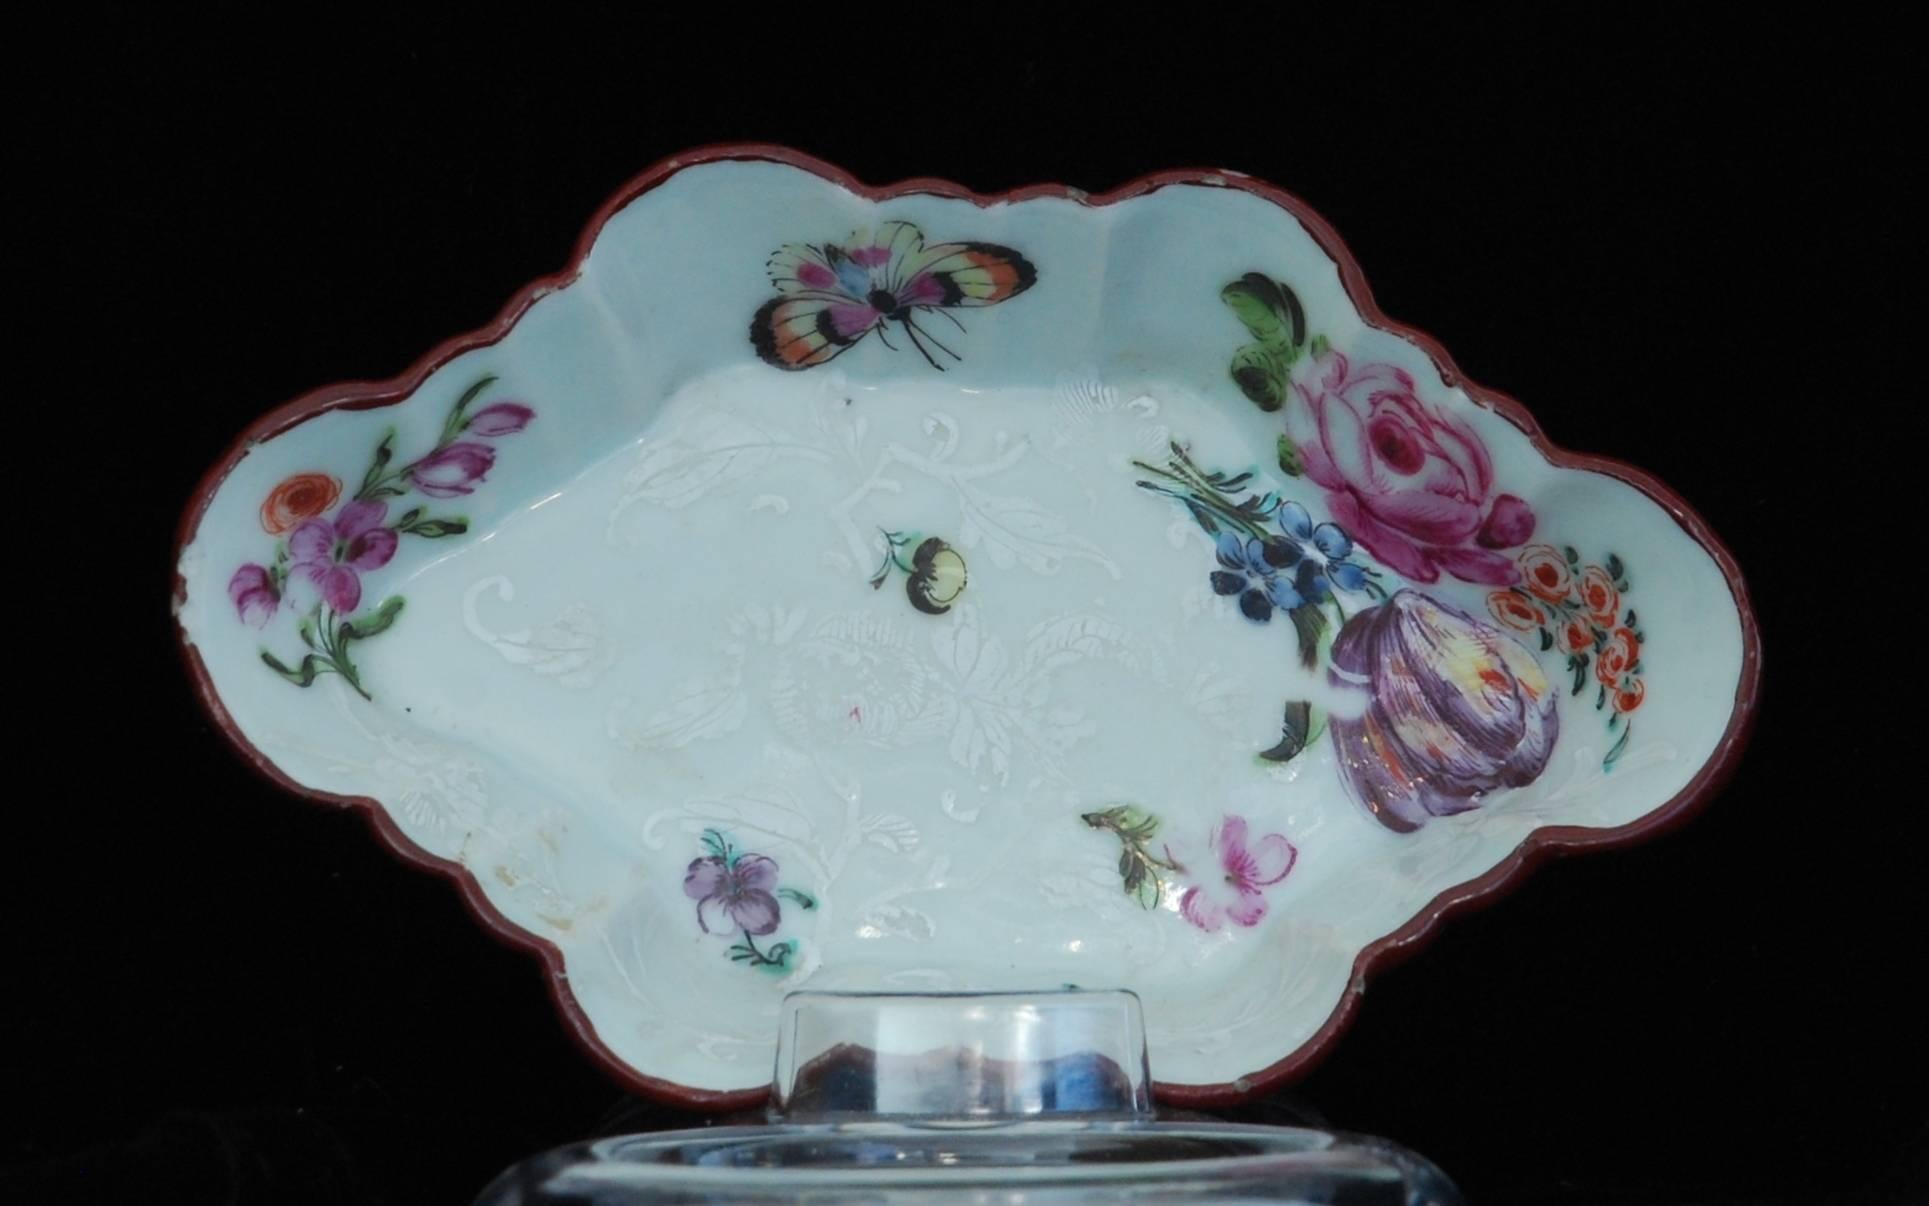 Chinese porcelain with white enamel decoration, enameled in the Giles studio with polychrome flowers and insects. The original white decoration can be seen under the enameling; Giles redecorated Chinese porcelain to suit the English